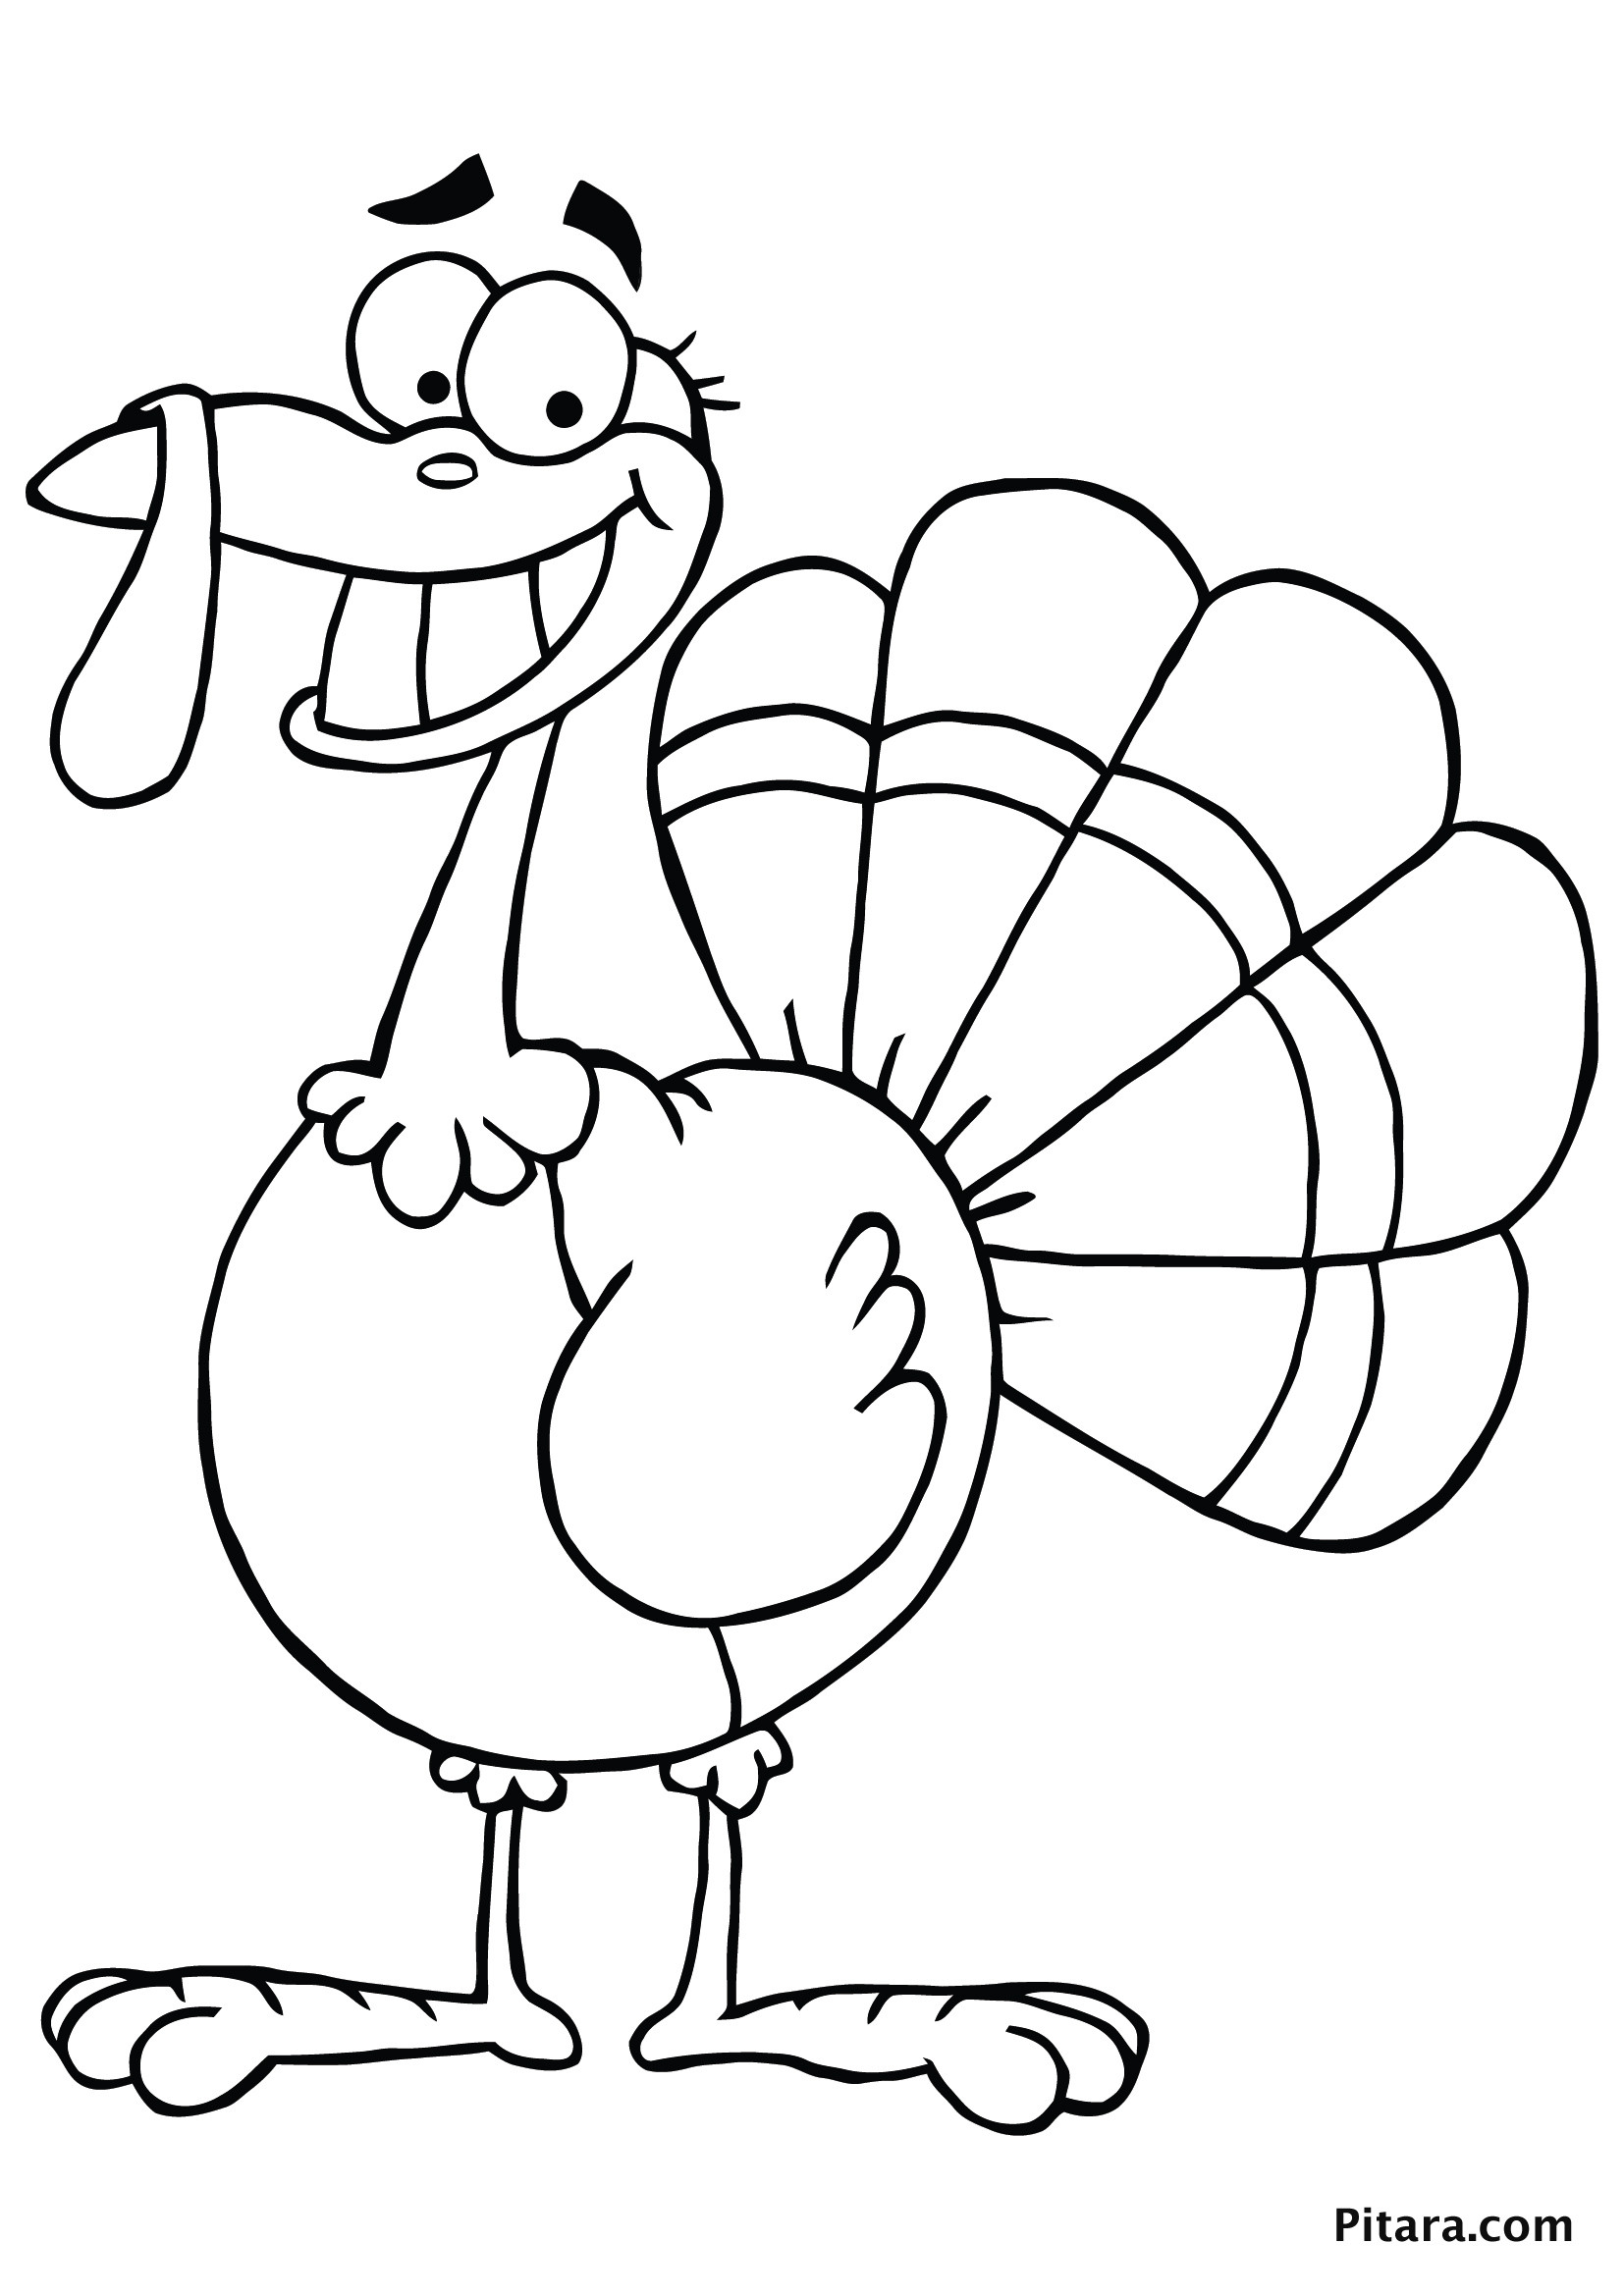 Turkey Coloring Pages Printable
 Turkey Coloring Pages for Kids